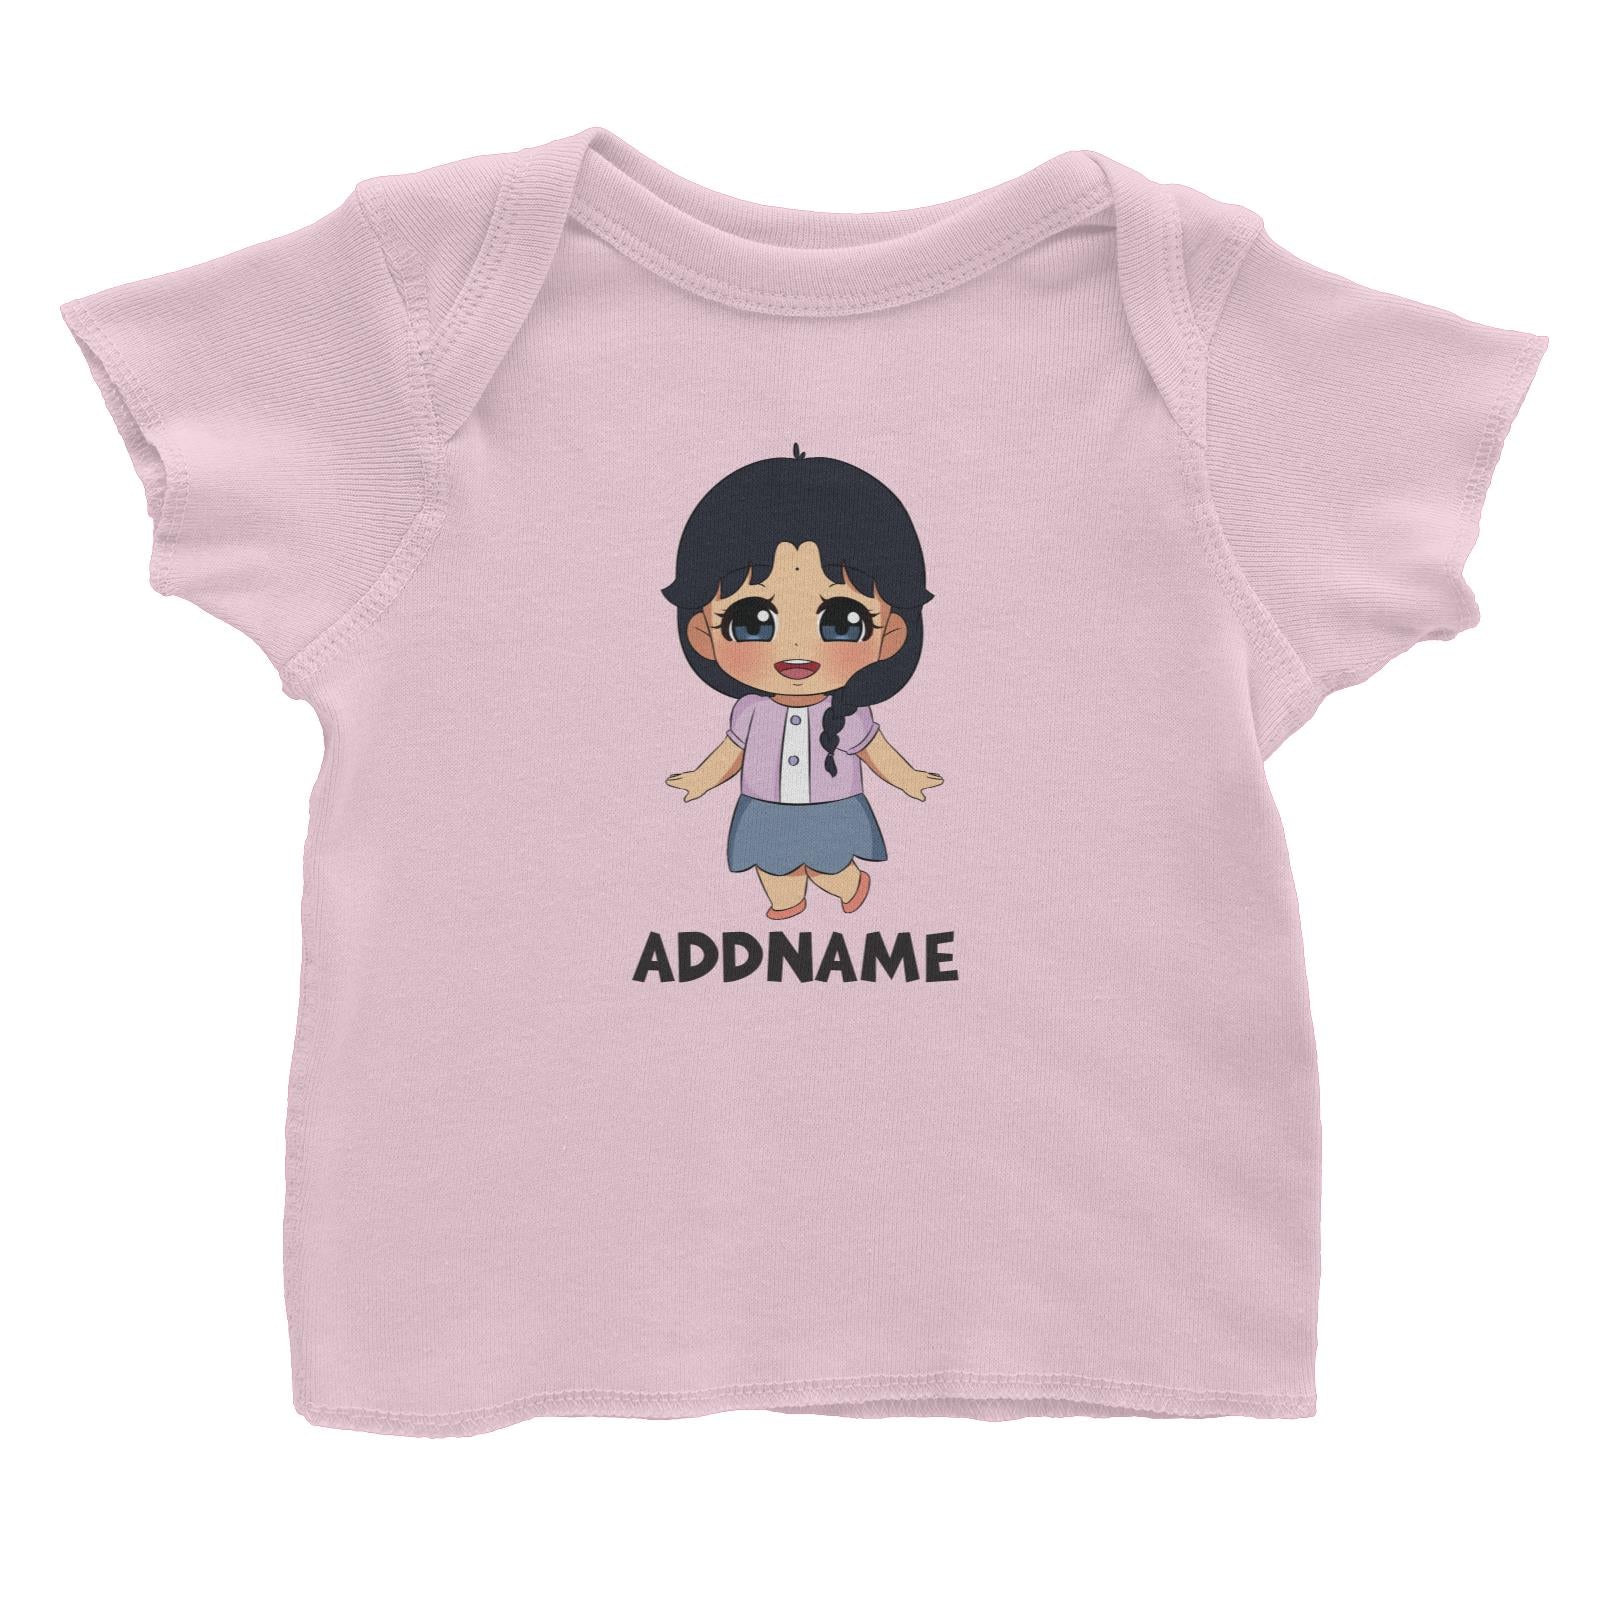 Children's Day Gift Series Little Indian Girl Addname Baby T-Shirt